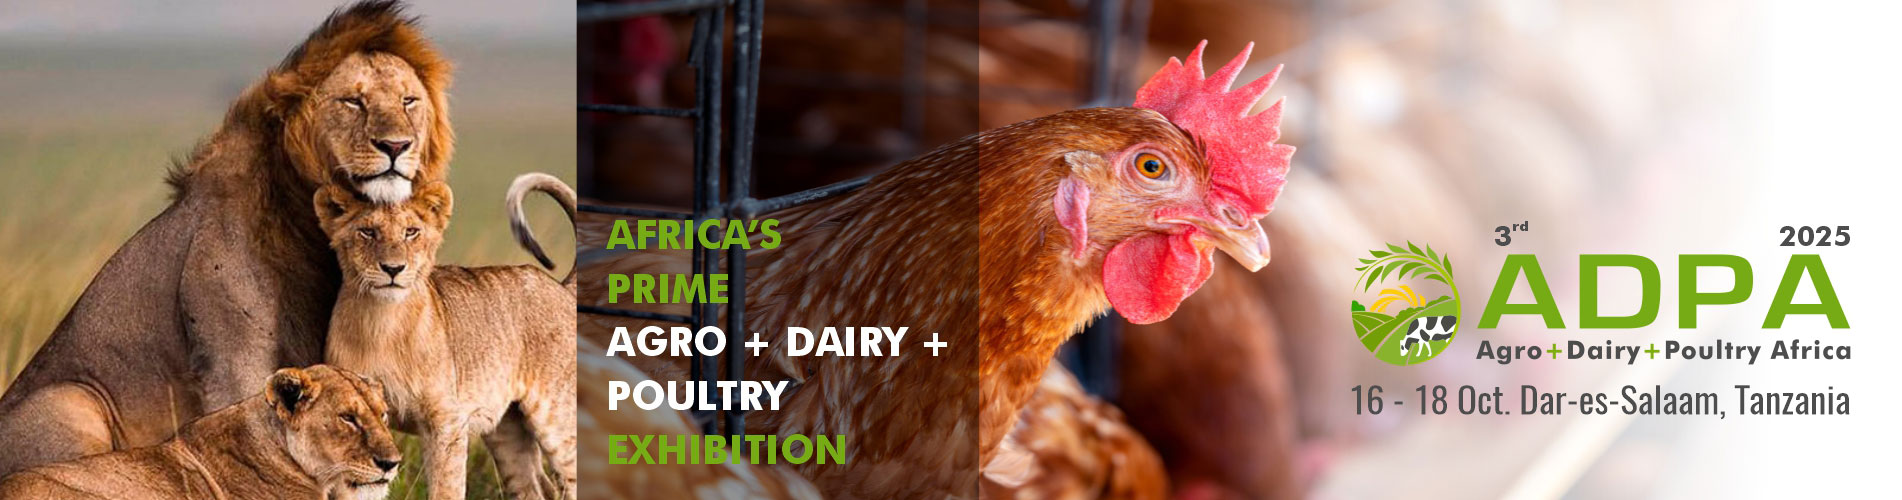 ADPAEXPO TANZANIA 2024 - International Agriculture, Dairy & Poultry  Show Africa